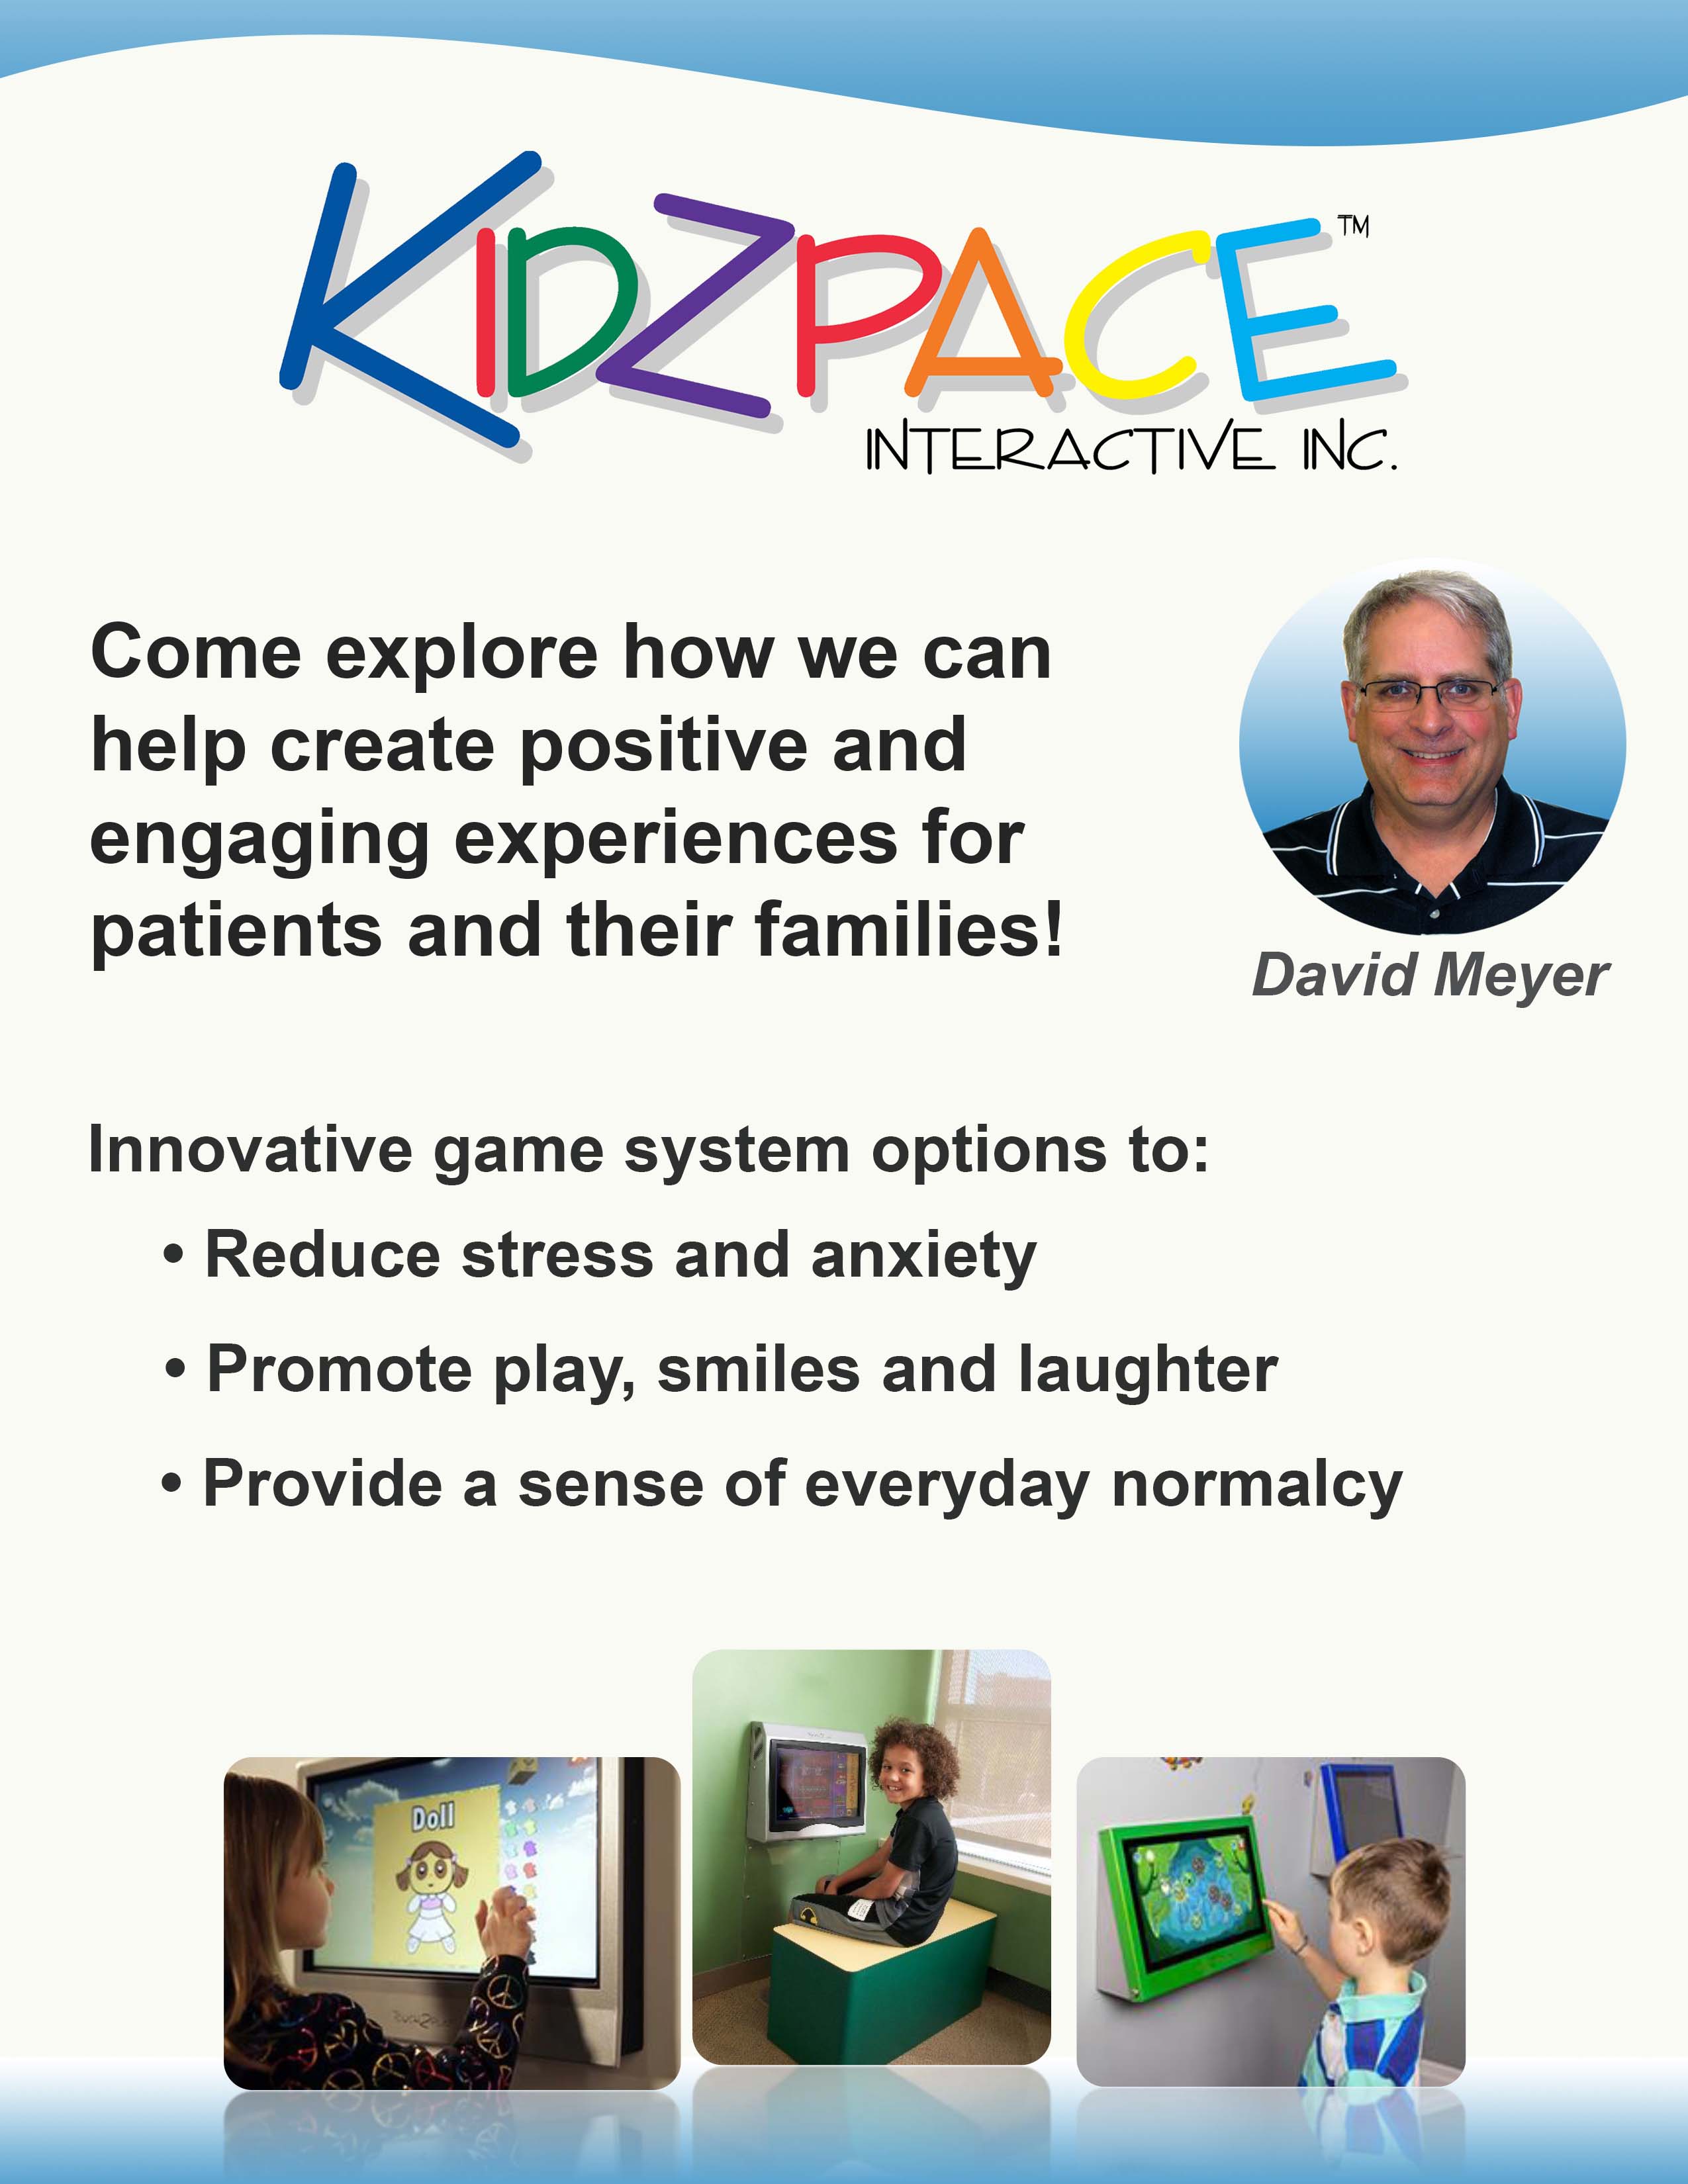 Touch2Play Max  Kidzpace Interactive Inc.